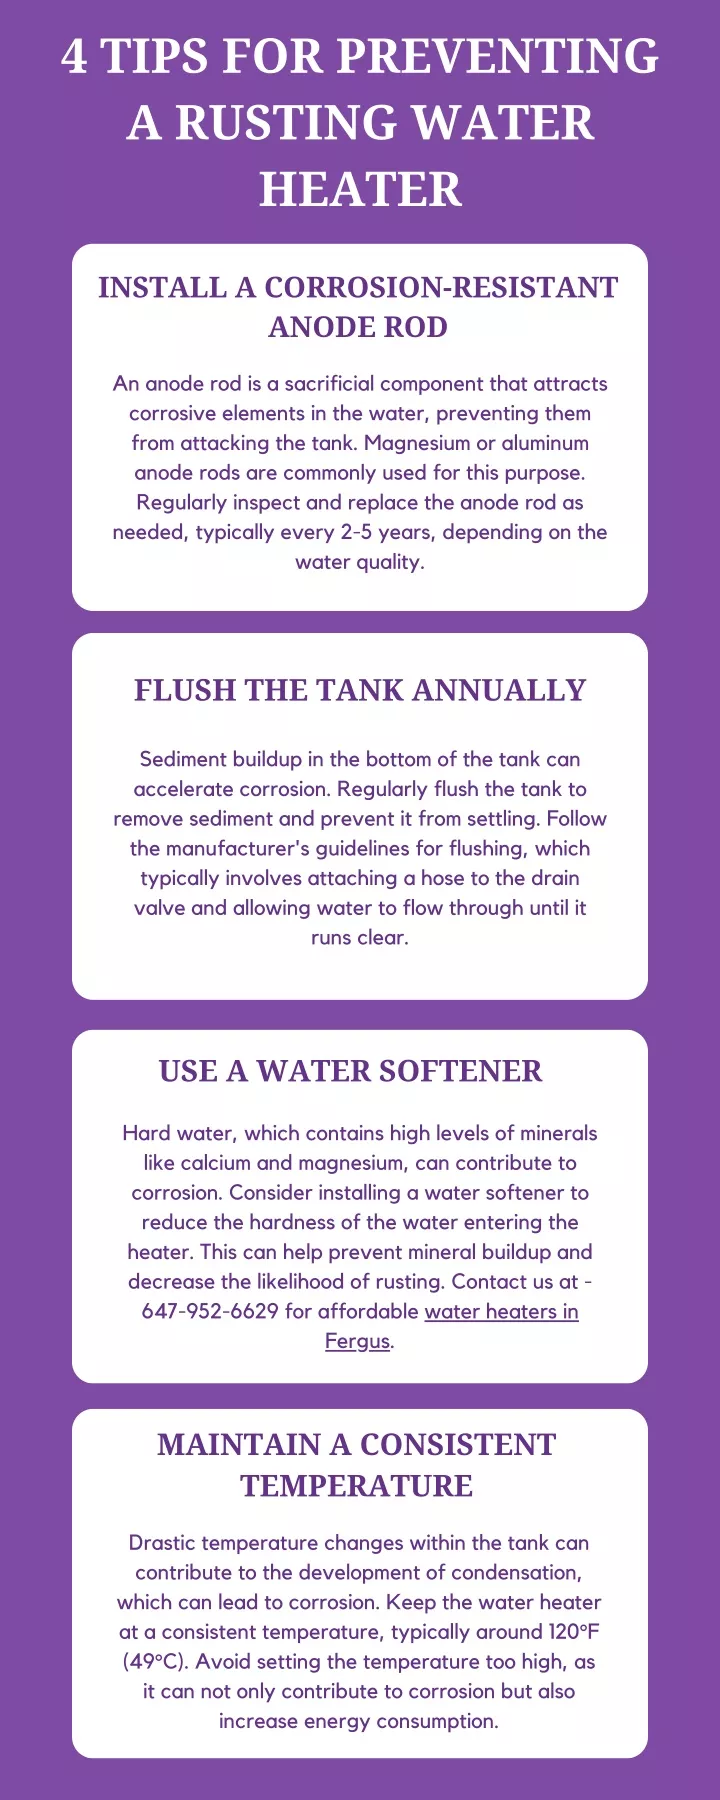 4 tips for preventing a rusting water heater